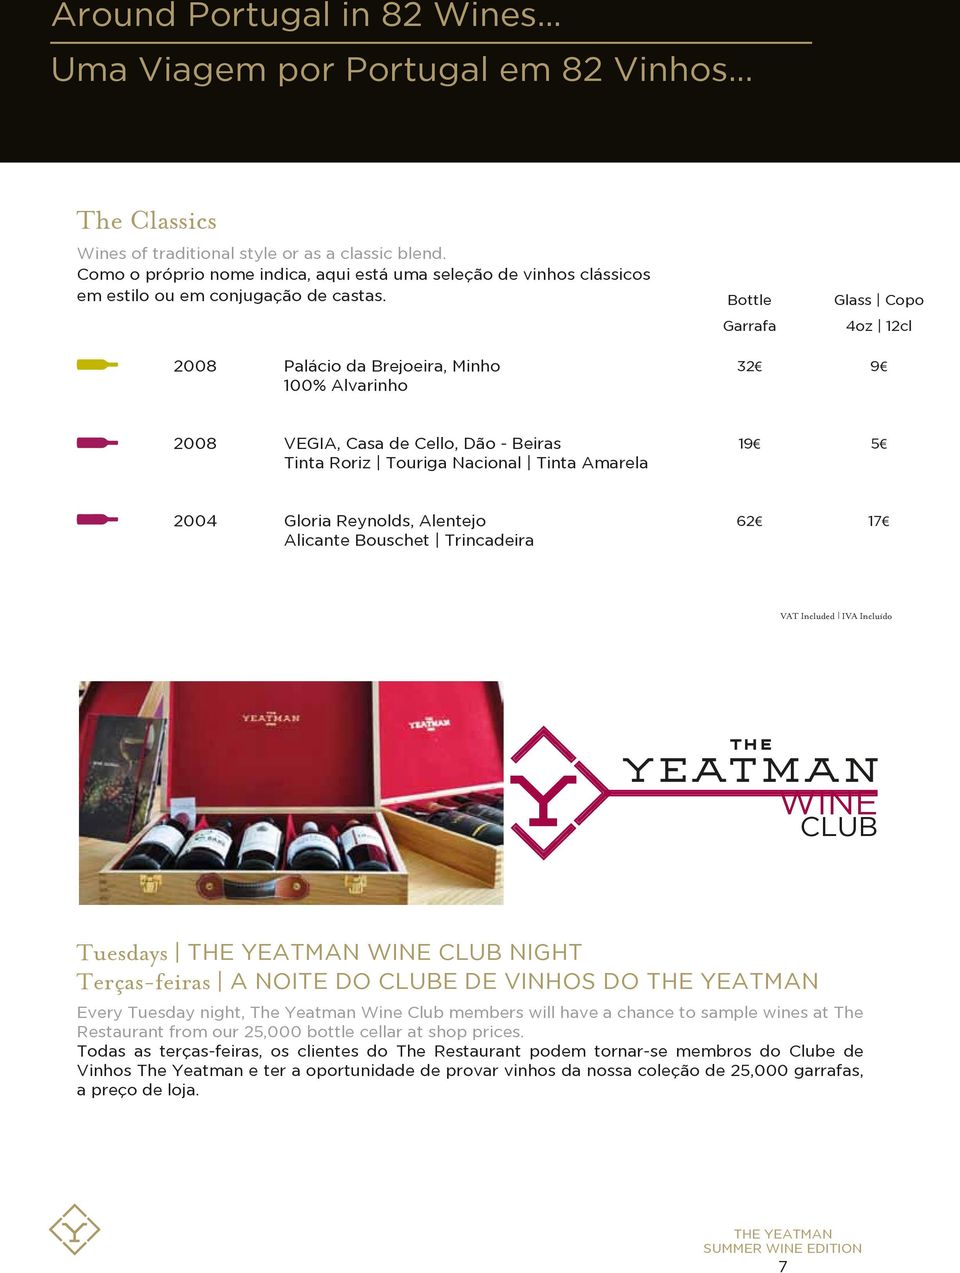 1 WINE CLUB Tuesdays WINE CLUB NIGHT Terças-feiras A NOITE DO CLUBE DE VINHOS DO Every Tuesday night, The Yeatman Wine Club members will have a chance to sample wines at The Restaurant from our